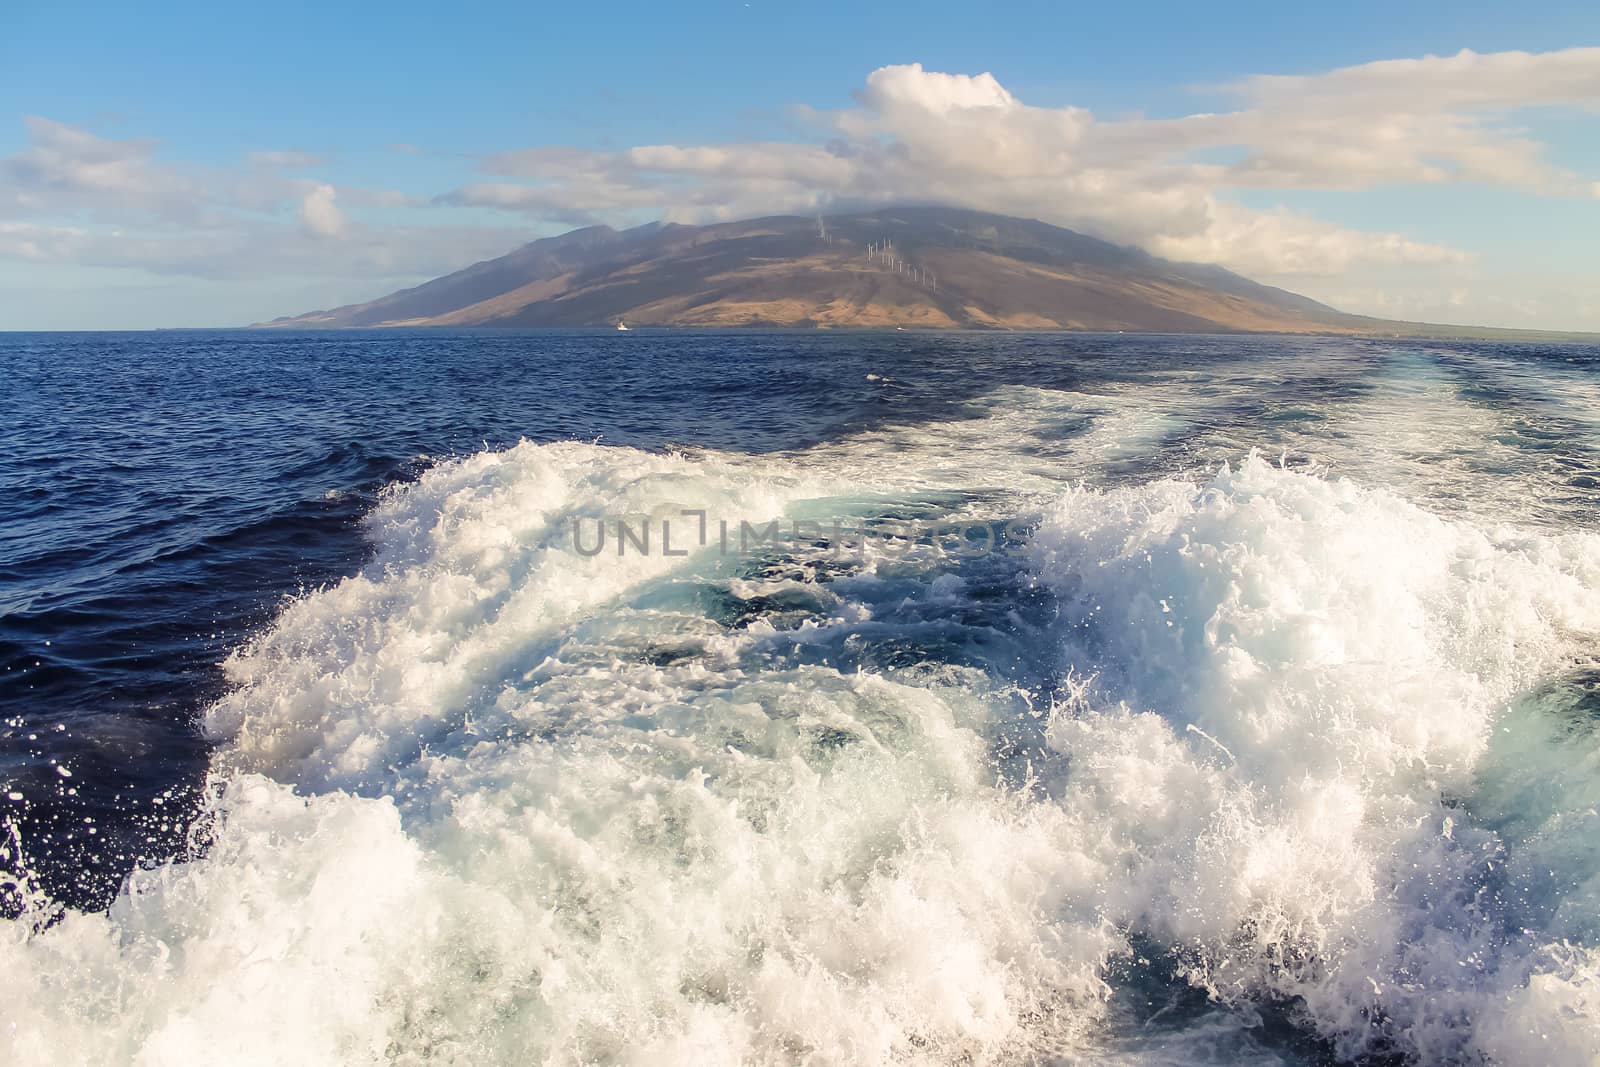 The island of Maui from the ocean by Alexanderphoto